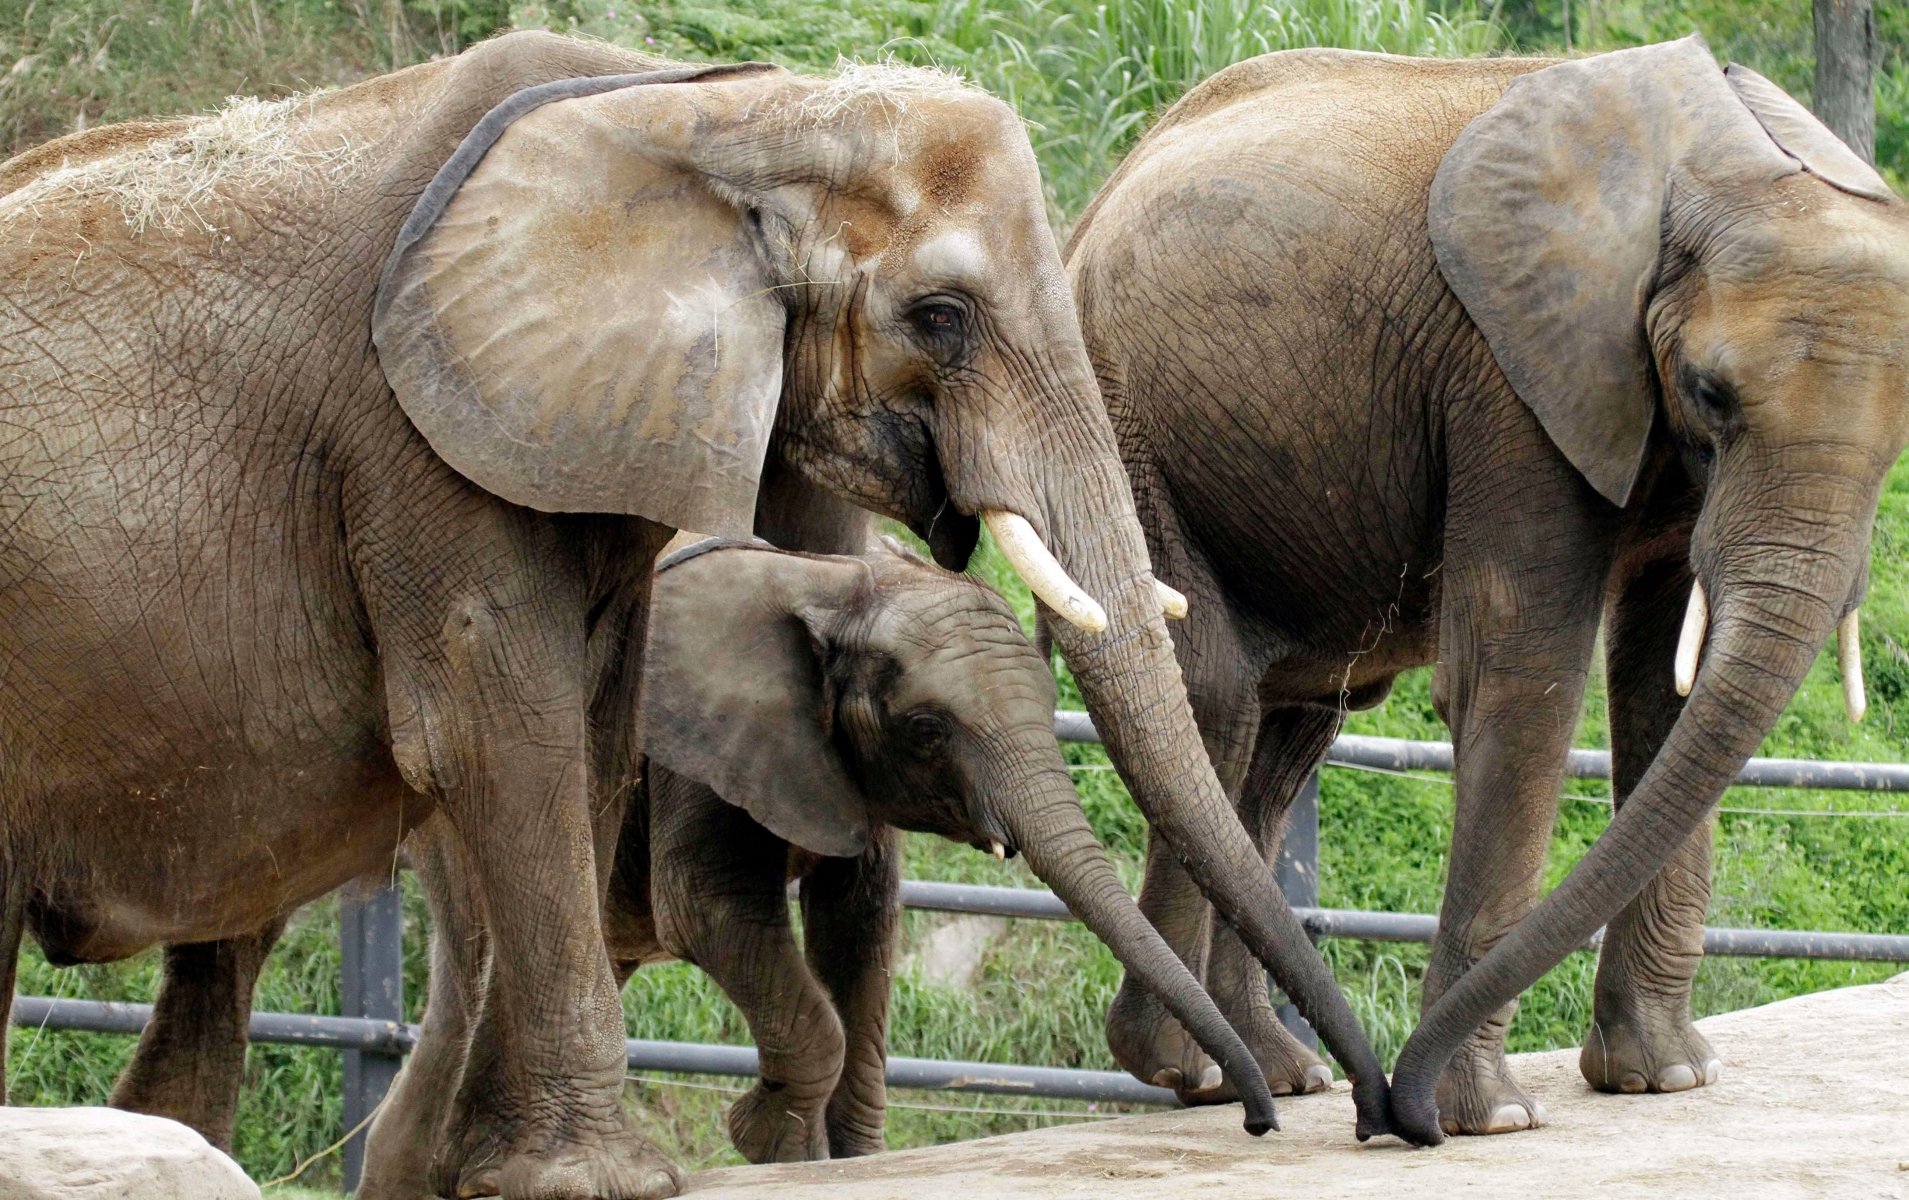 Moja, left, a 28-year-old African Elephant, and her two daughters, Zuri, 3, center rear, and Victoria, 11, all born at the Pittsburgh Zoo & PPG Aquarium, spend the afternoon in the zoo's elephant habitat on Monday, Aug. 8, 2011. Pittsburgh zoo officials trying to establish North America's first elephant sperm bank have been slowed by bureaucratic hurdles but hope South African officials will approve shipping frozen elephant semen to the United States in about a month. (AP Photo/Gene J. Puskar) Project Frozen Dumbo